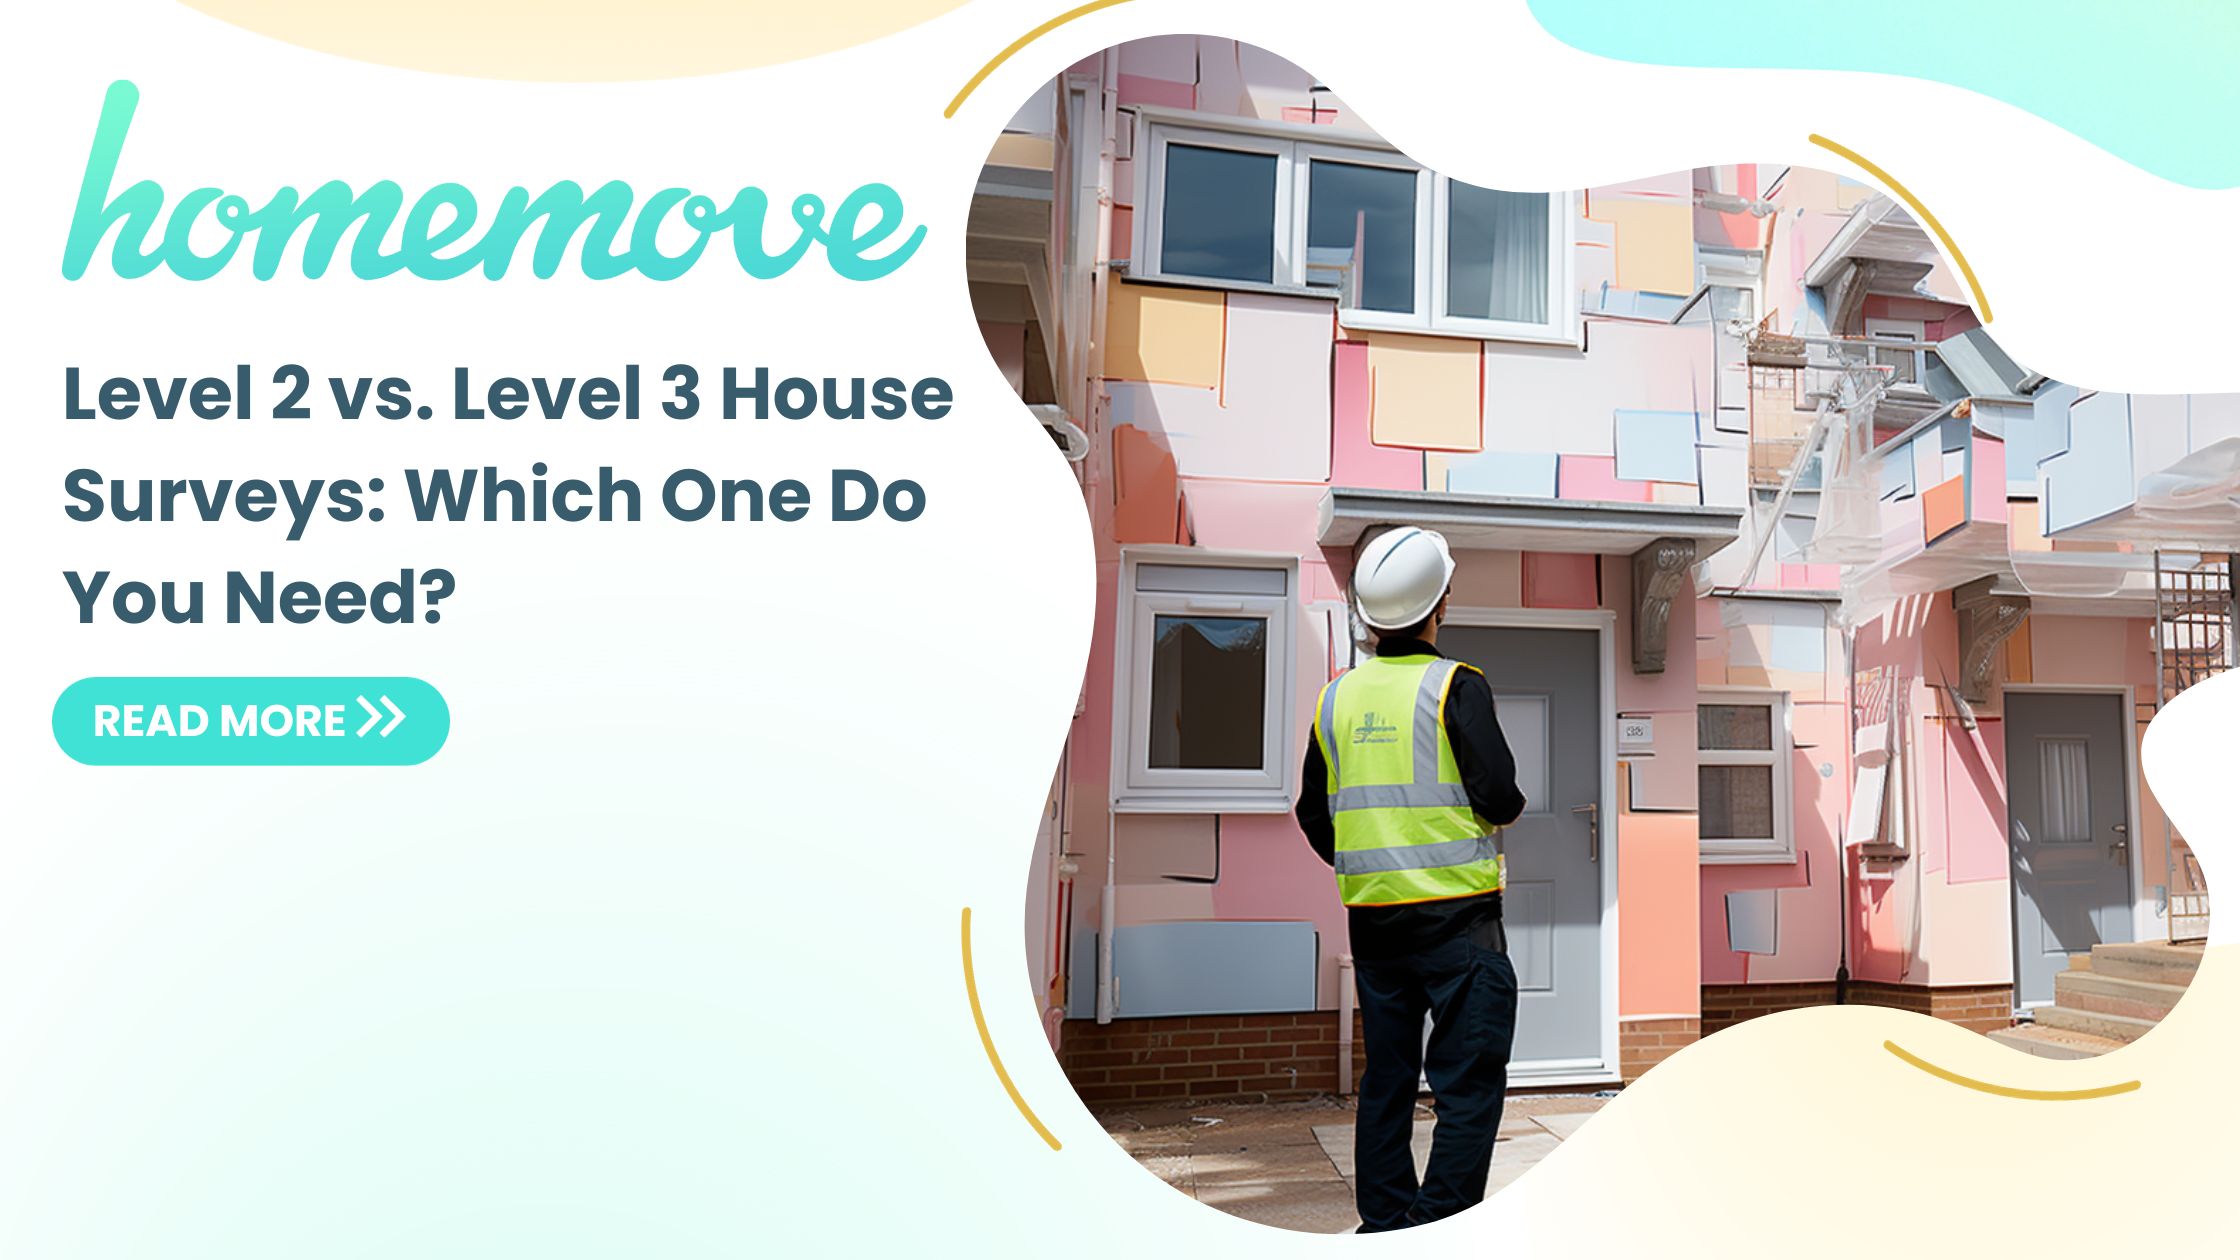 You are currently viewing Level 2 vs. Level 3 House Surveys: Which One Do You Need?